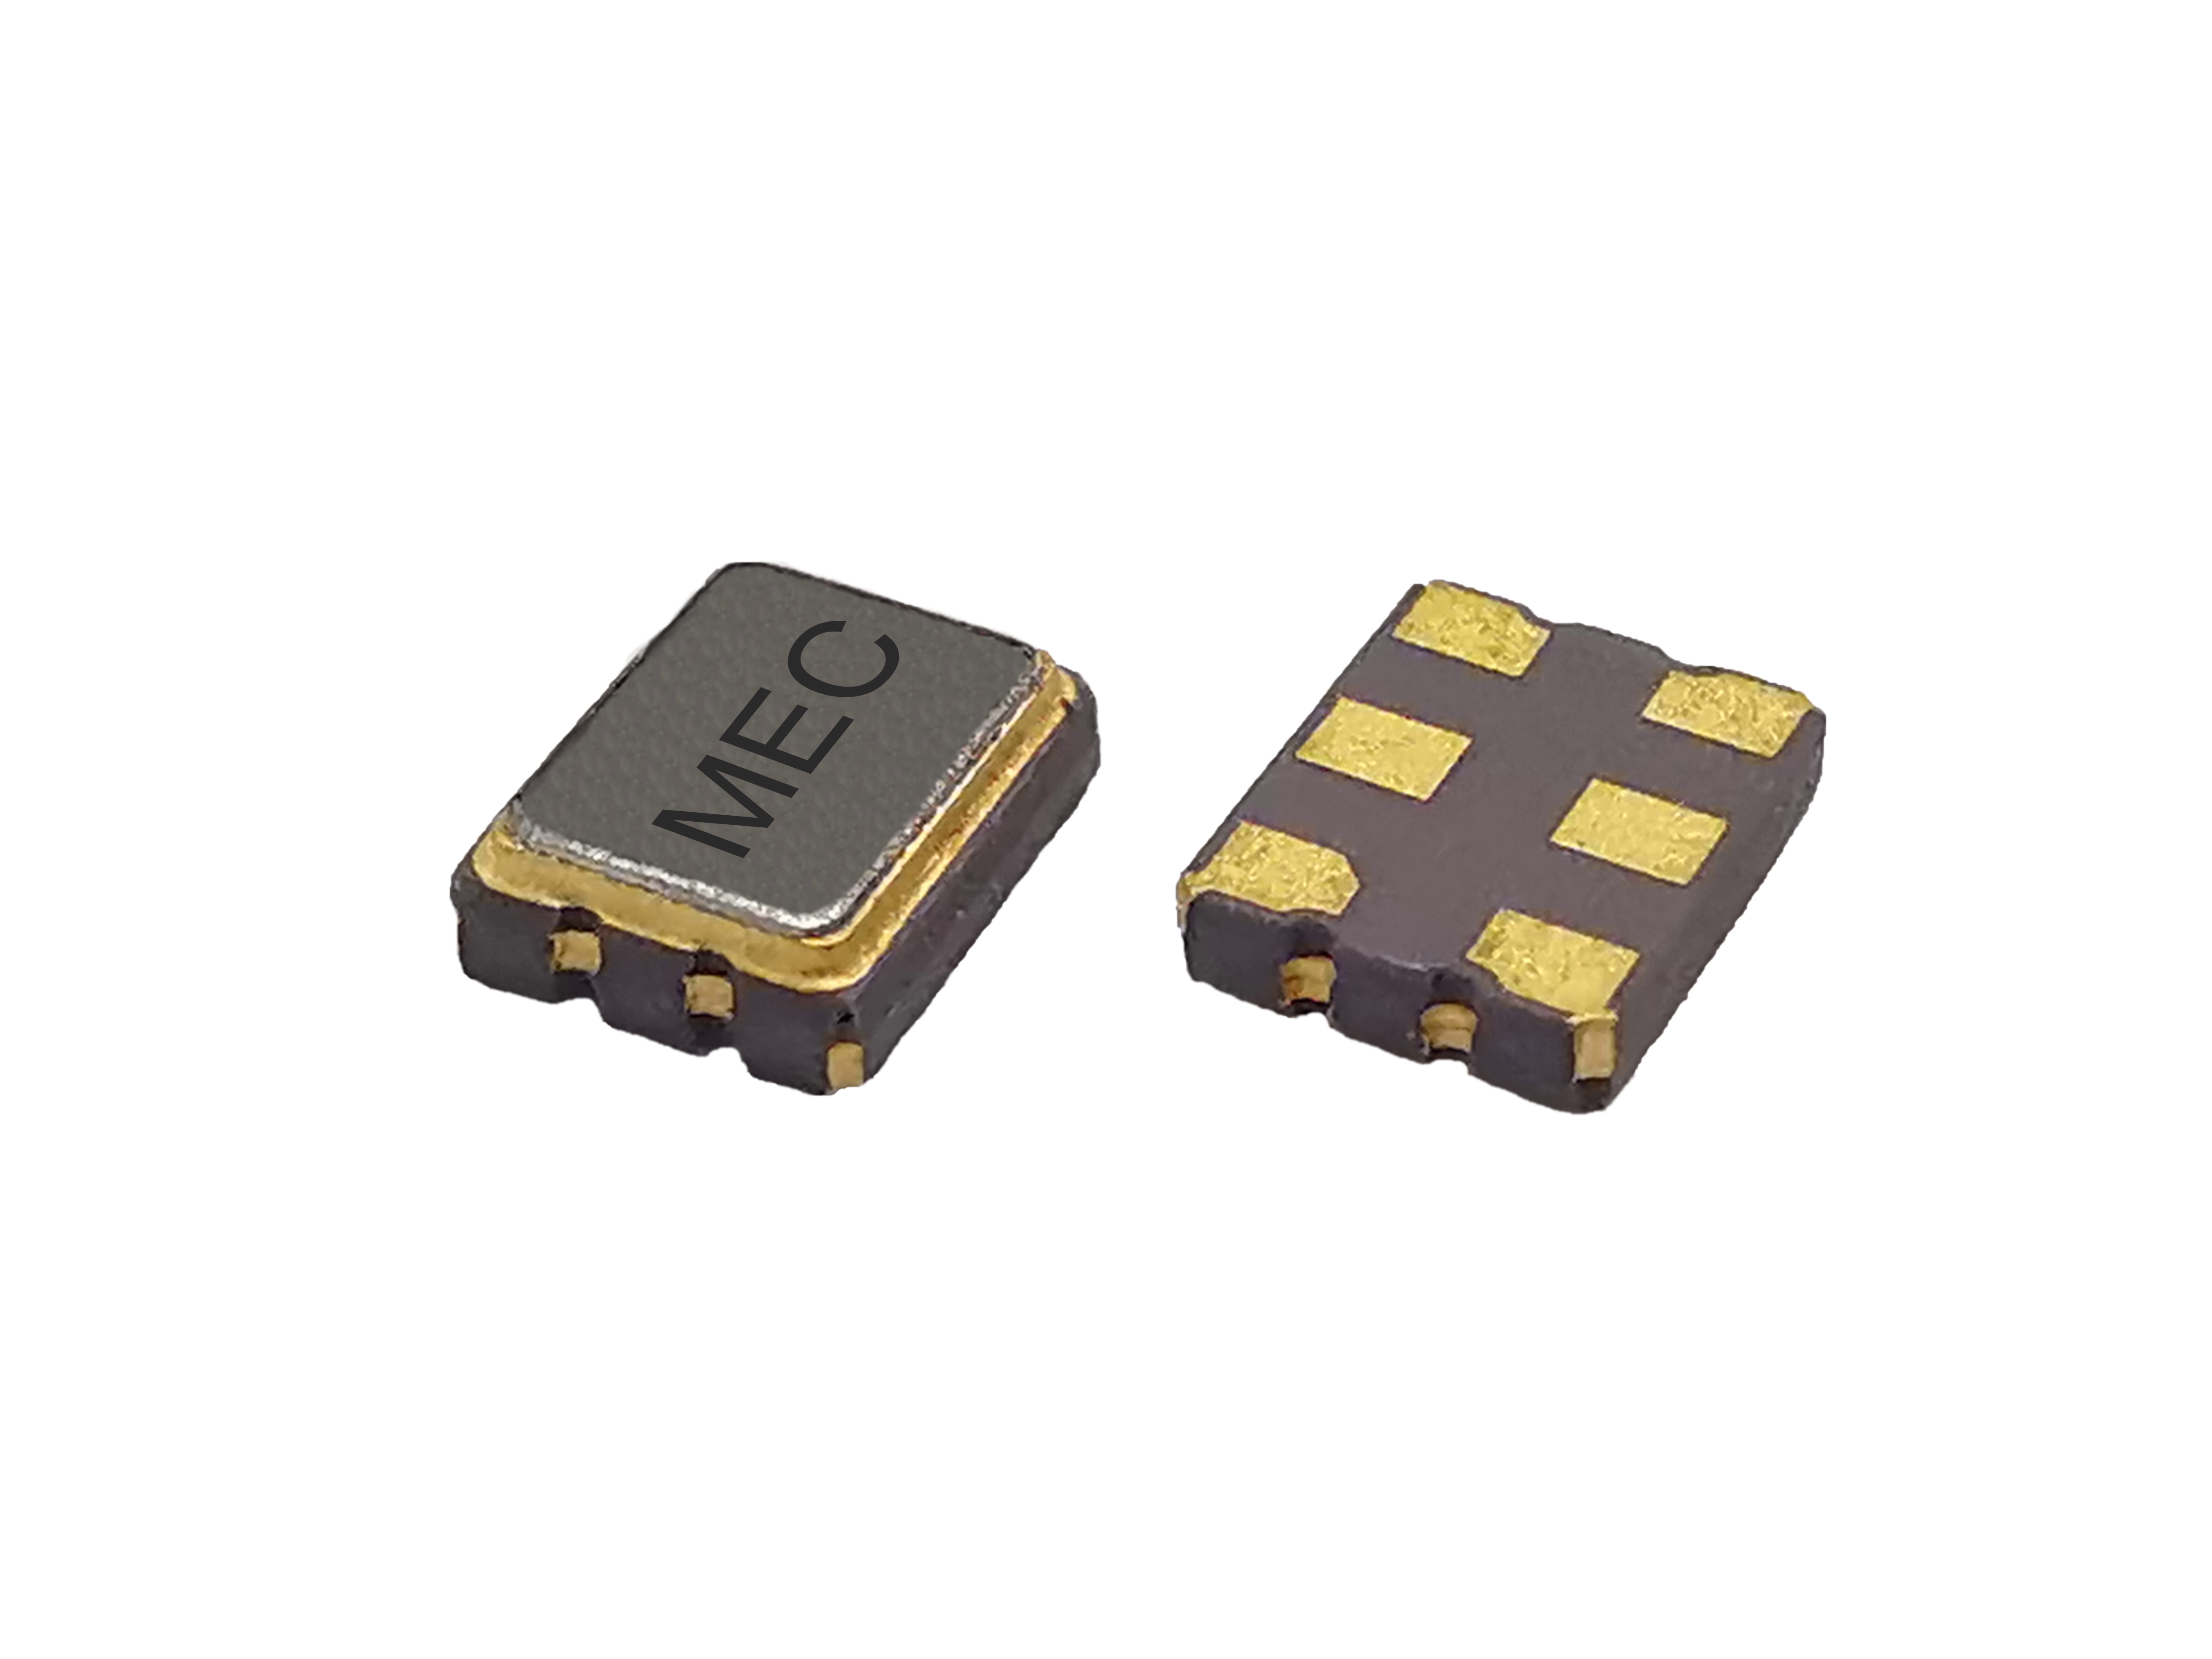 HPQF326 3225 2.5V Quick-Turn Programmable Differential LVPECL SMD Crystal Oscillator